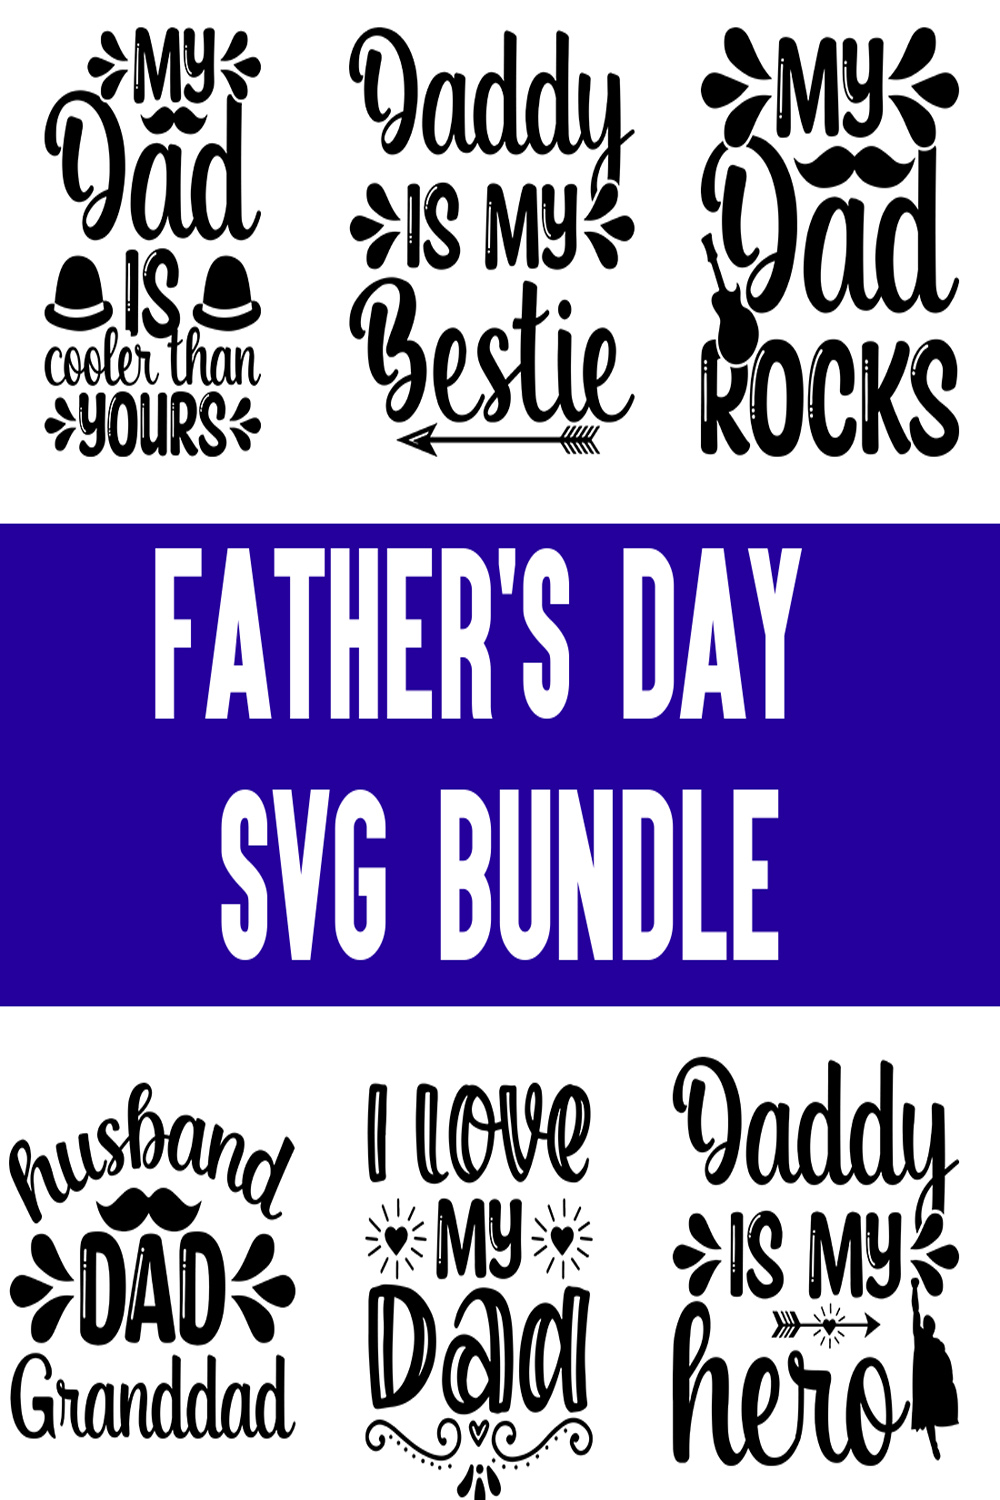 Father's Day svg Bundle pinterest preview image.